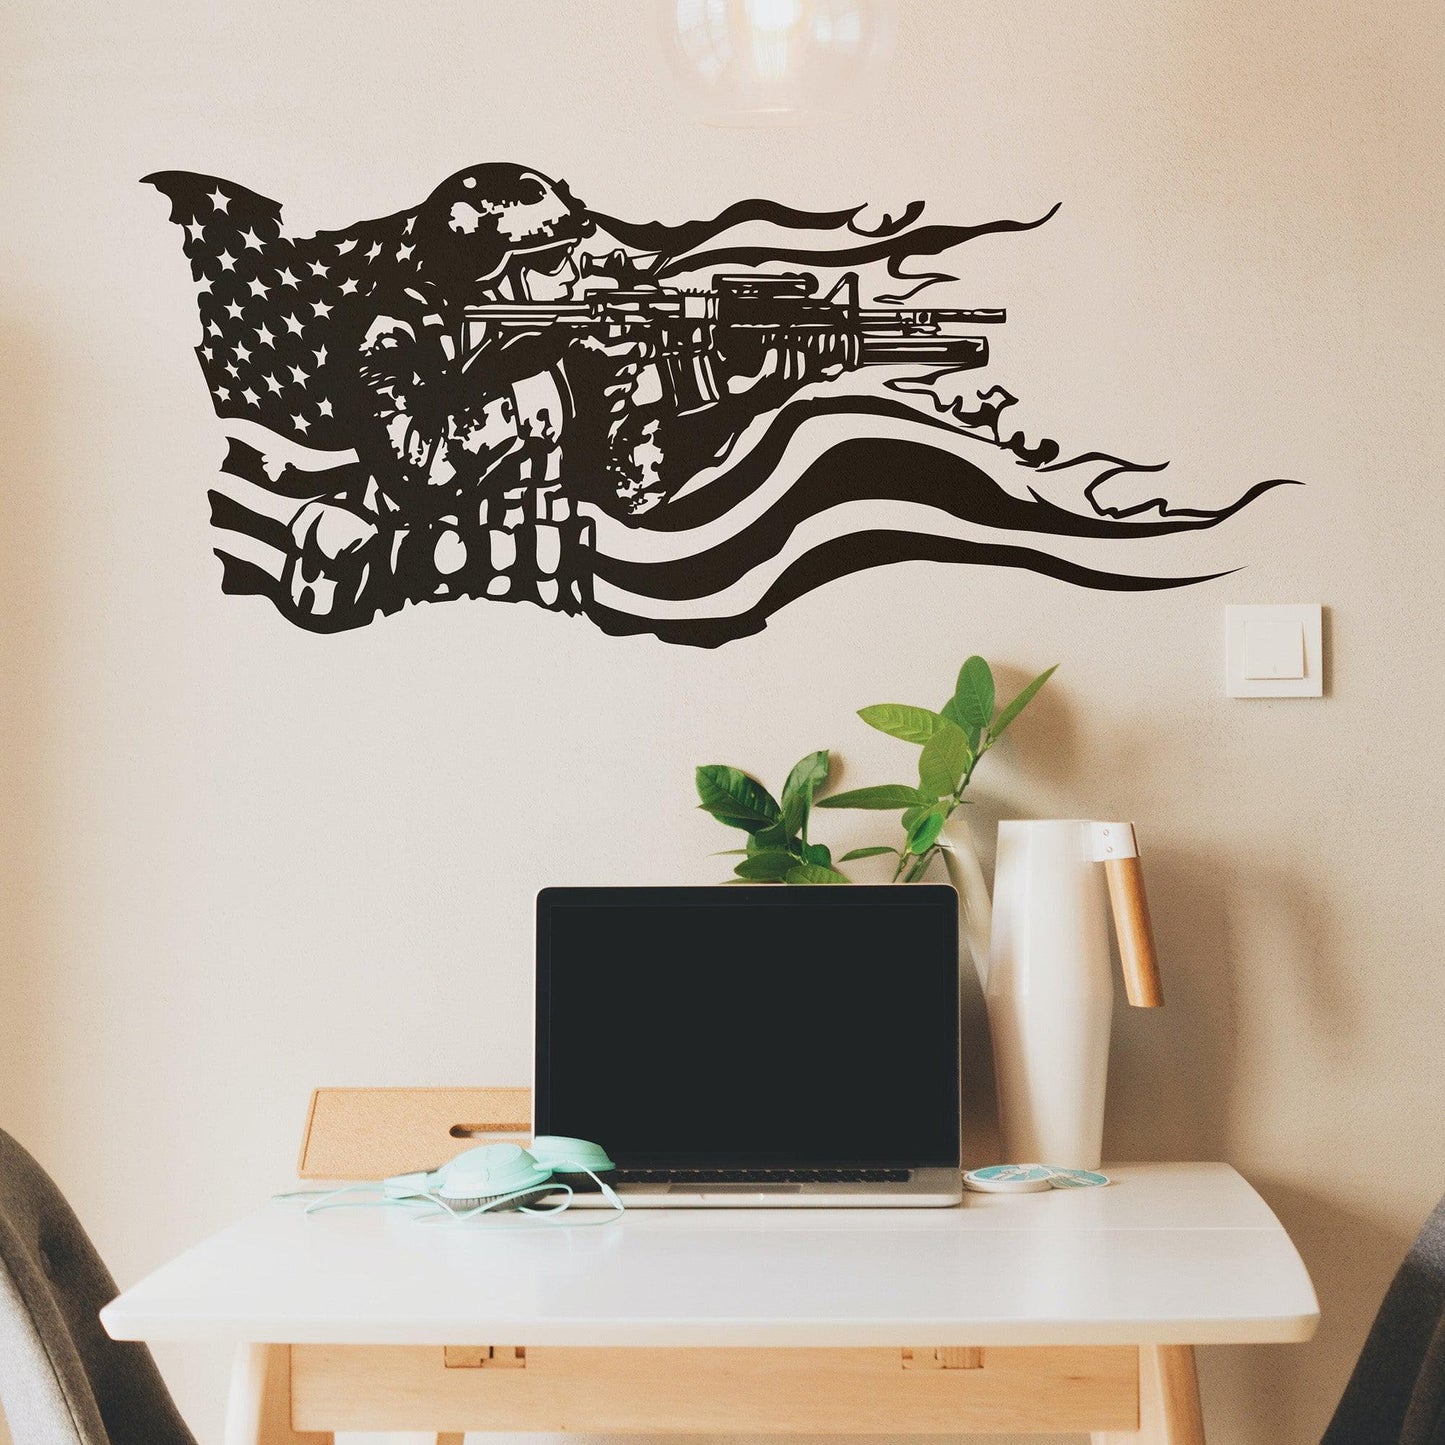 America Flag with U.S. Military Soldier Vinyl Wall Decal Sticker. #GFoster155